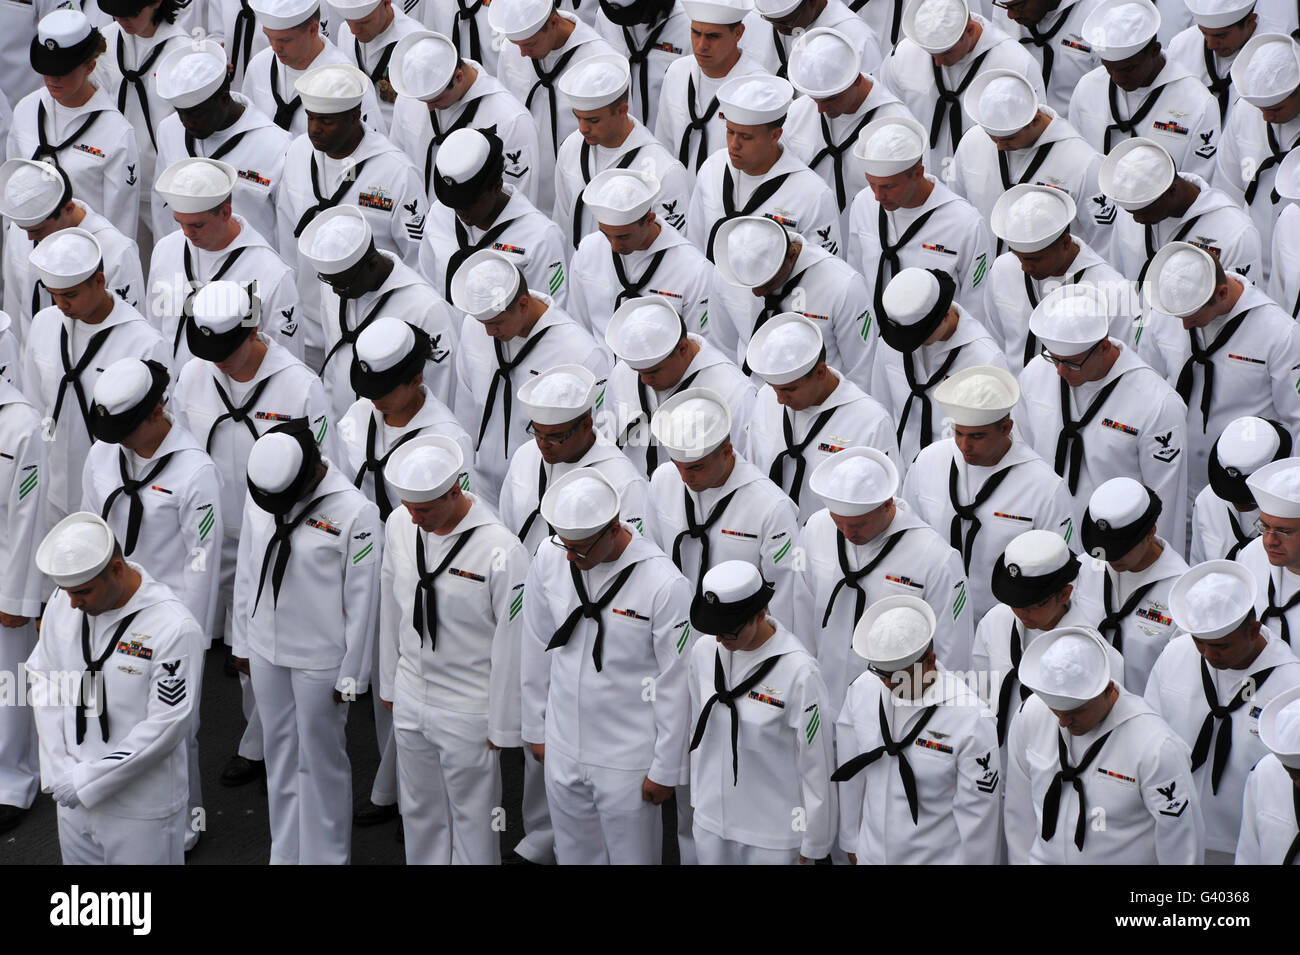 Sailors bow their heads during a change of command ceremony. Stock Photo